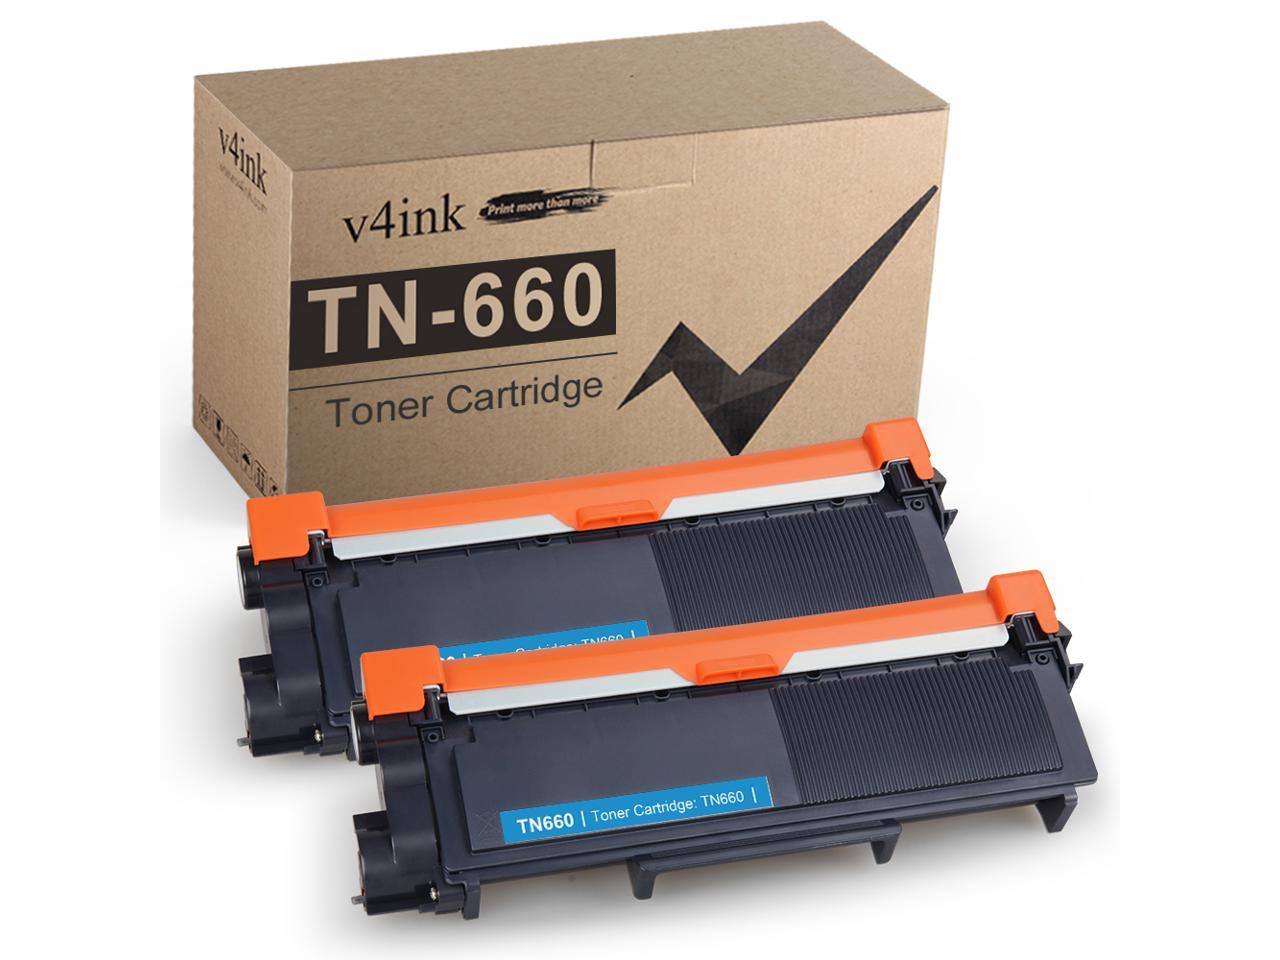 1 Pack Sold by Green Toner Supply Compatible TN660 TN630 Toner Cartridge TN-660 TN-630 for Brother DCP-L2520DW DCP-L2540DW MFC-L2720DW MFC-L2740DW Printer